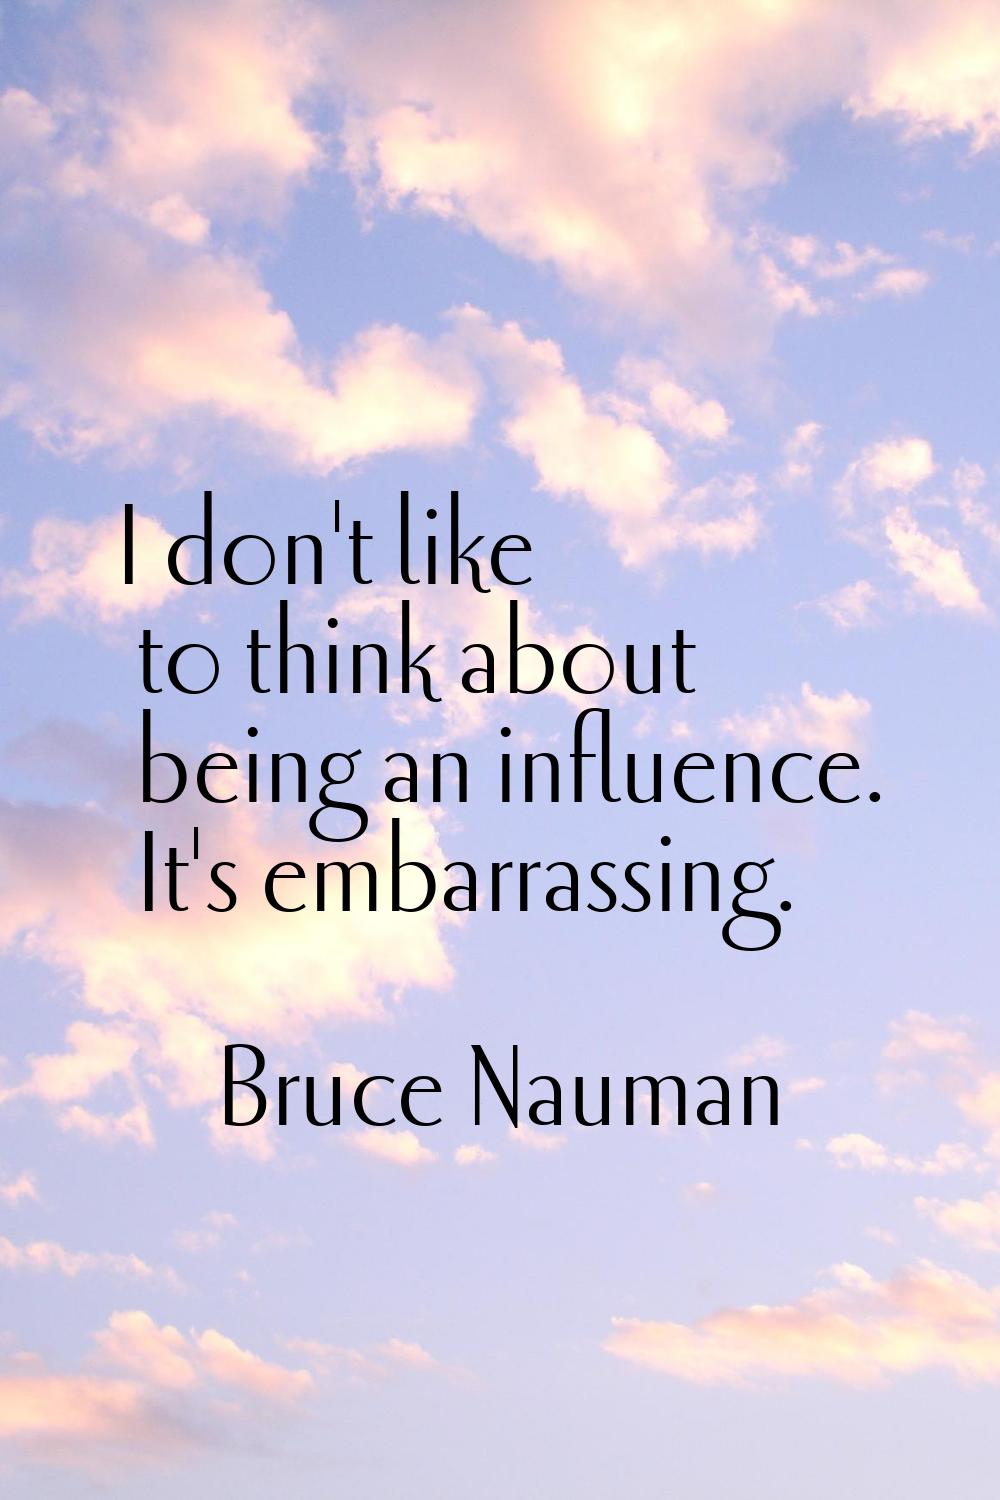 I don't like to think about being an influence. It's embarrassing.